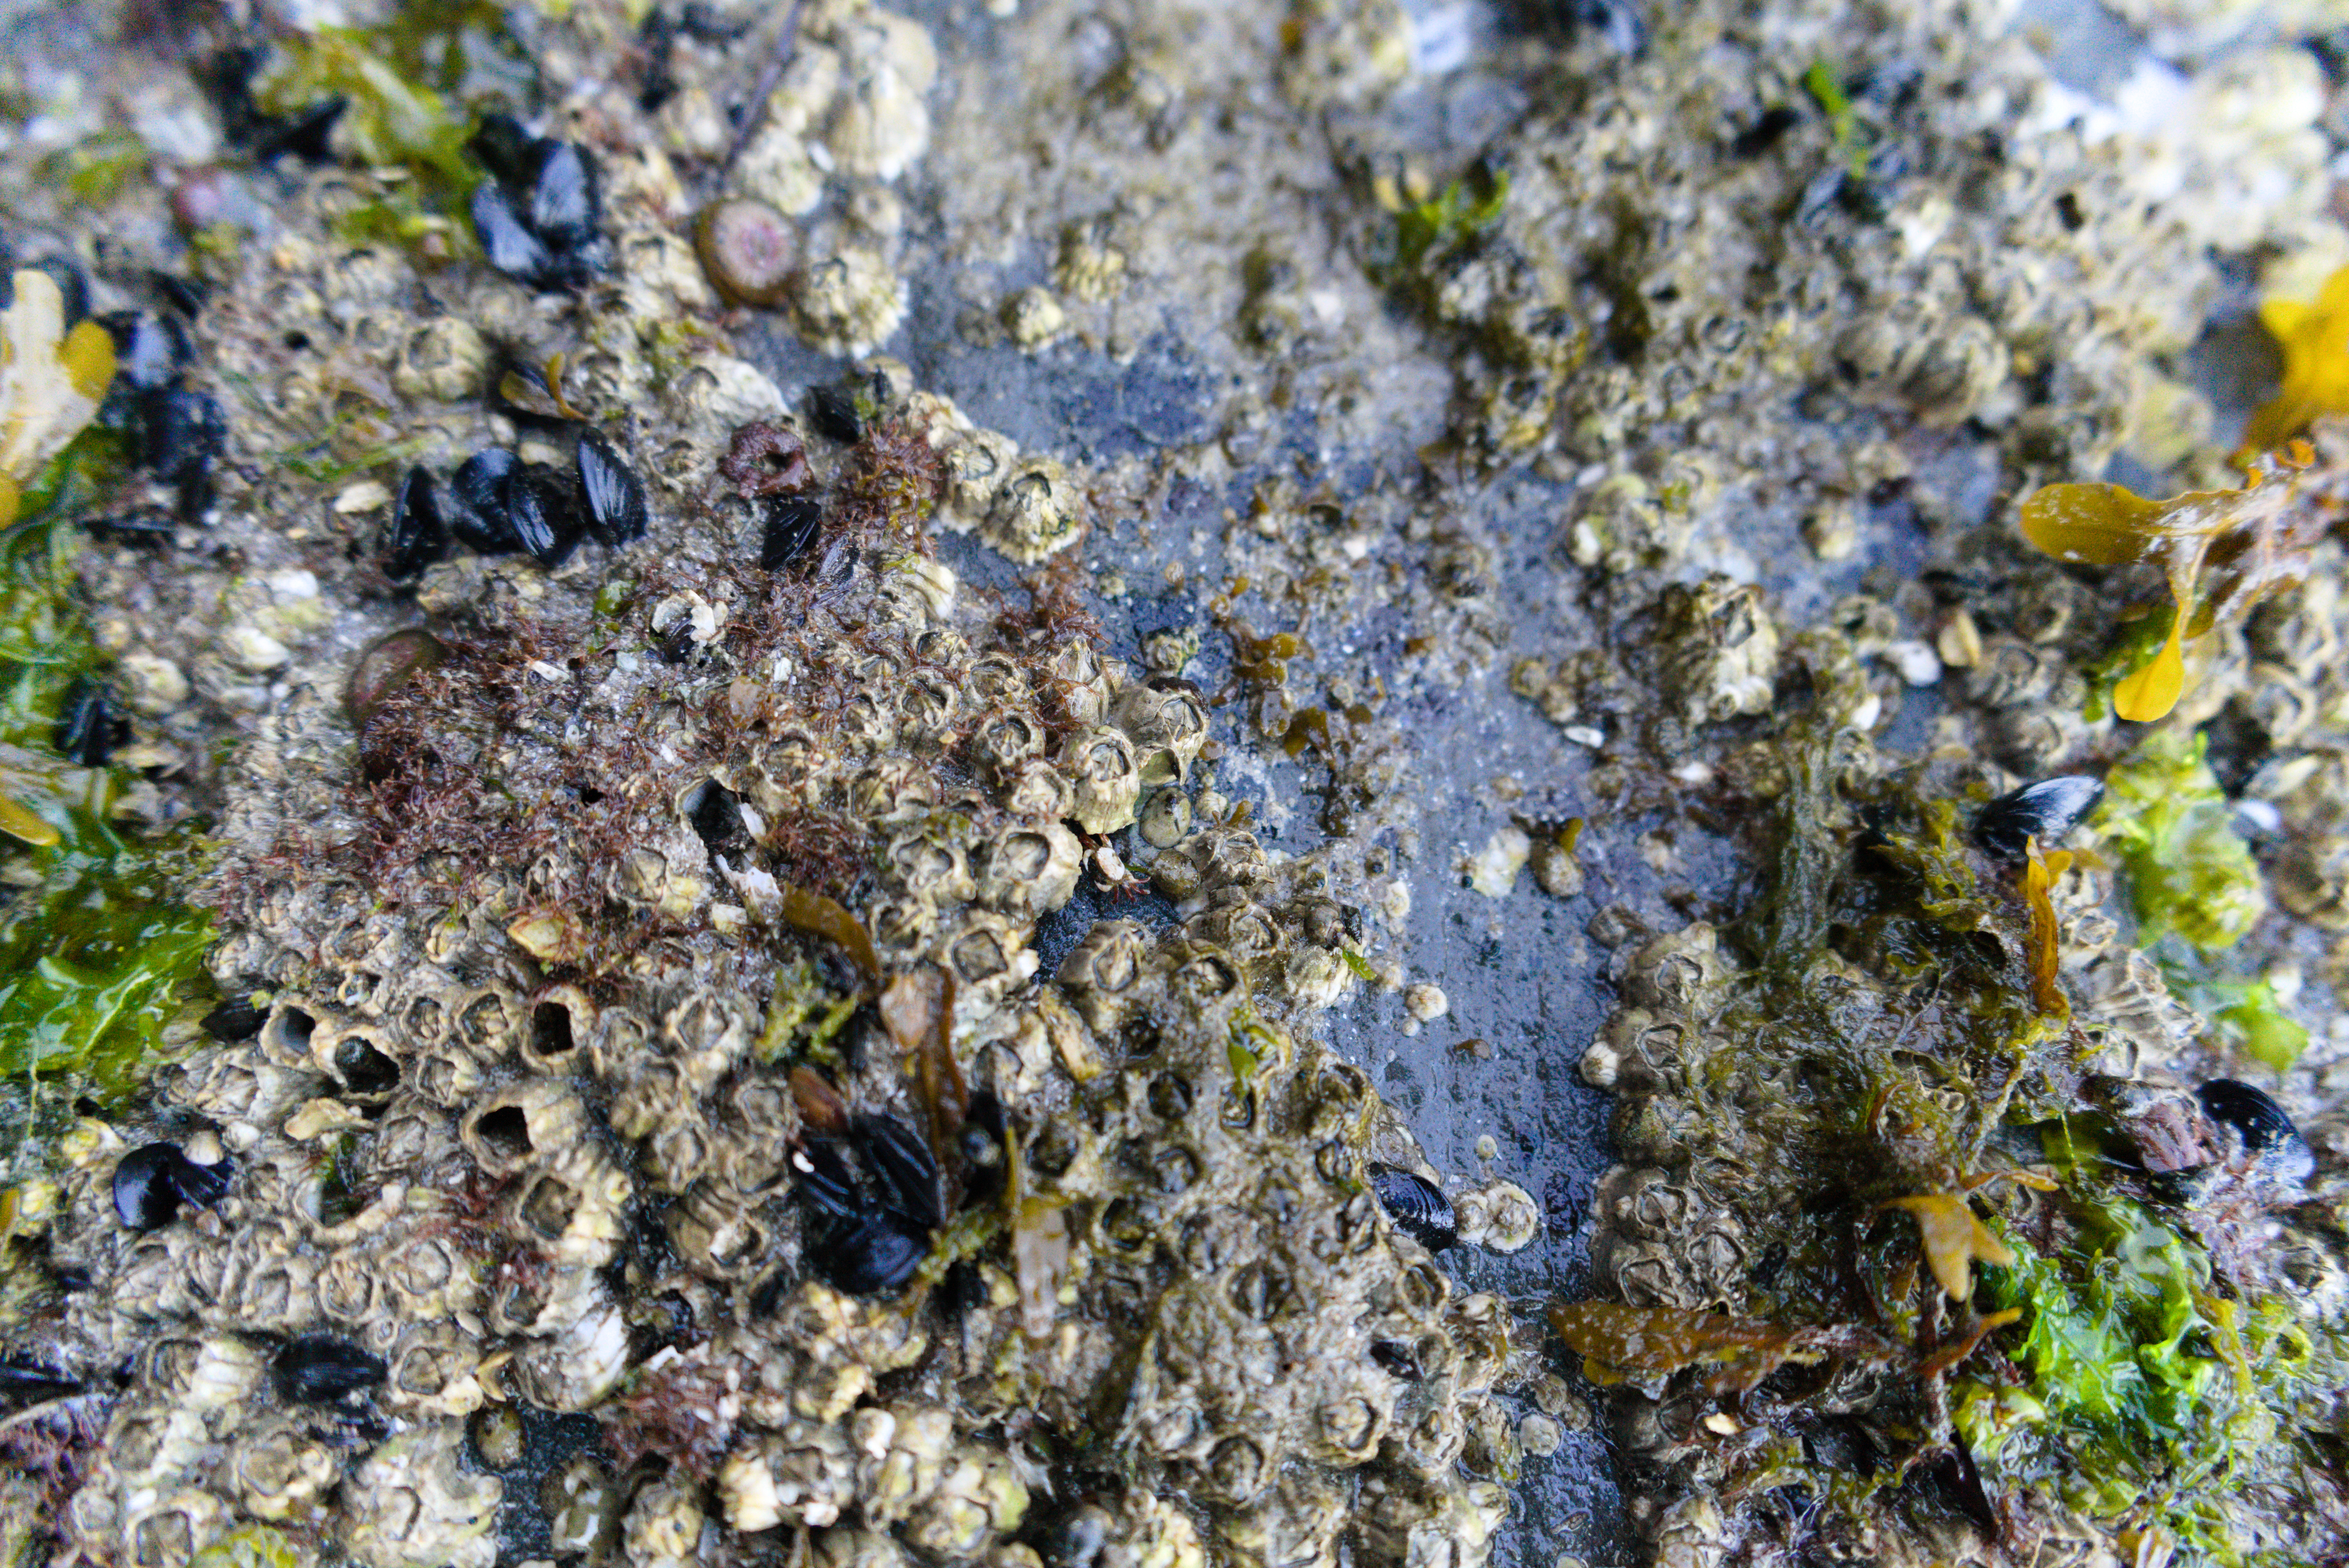 a close up of a rock with a little crab hiding in the barnacles